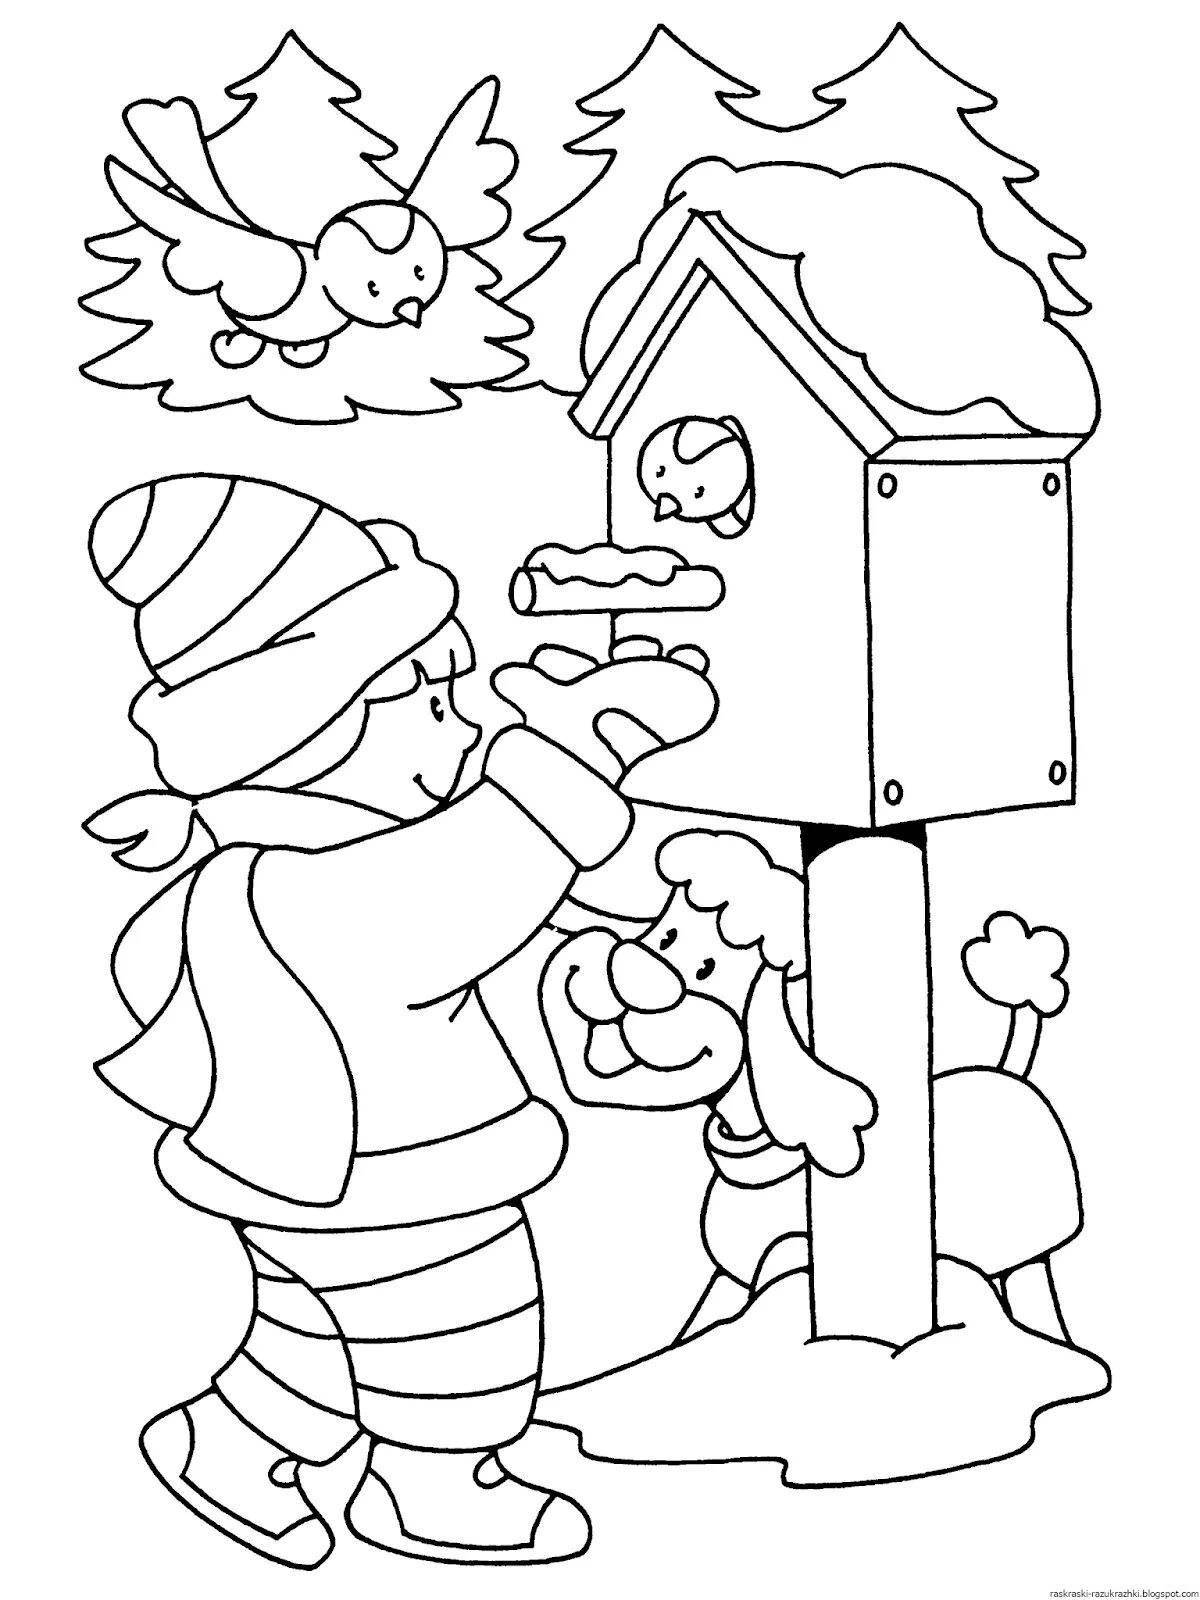 Coloring book shining baby winter